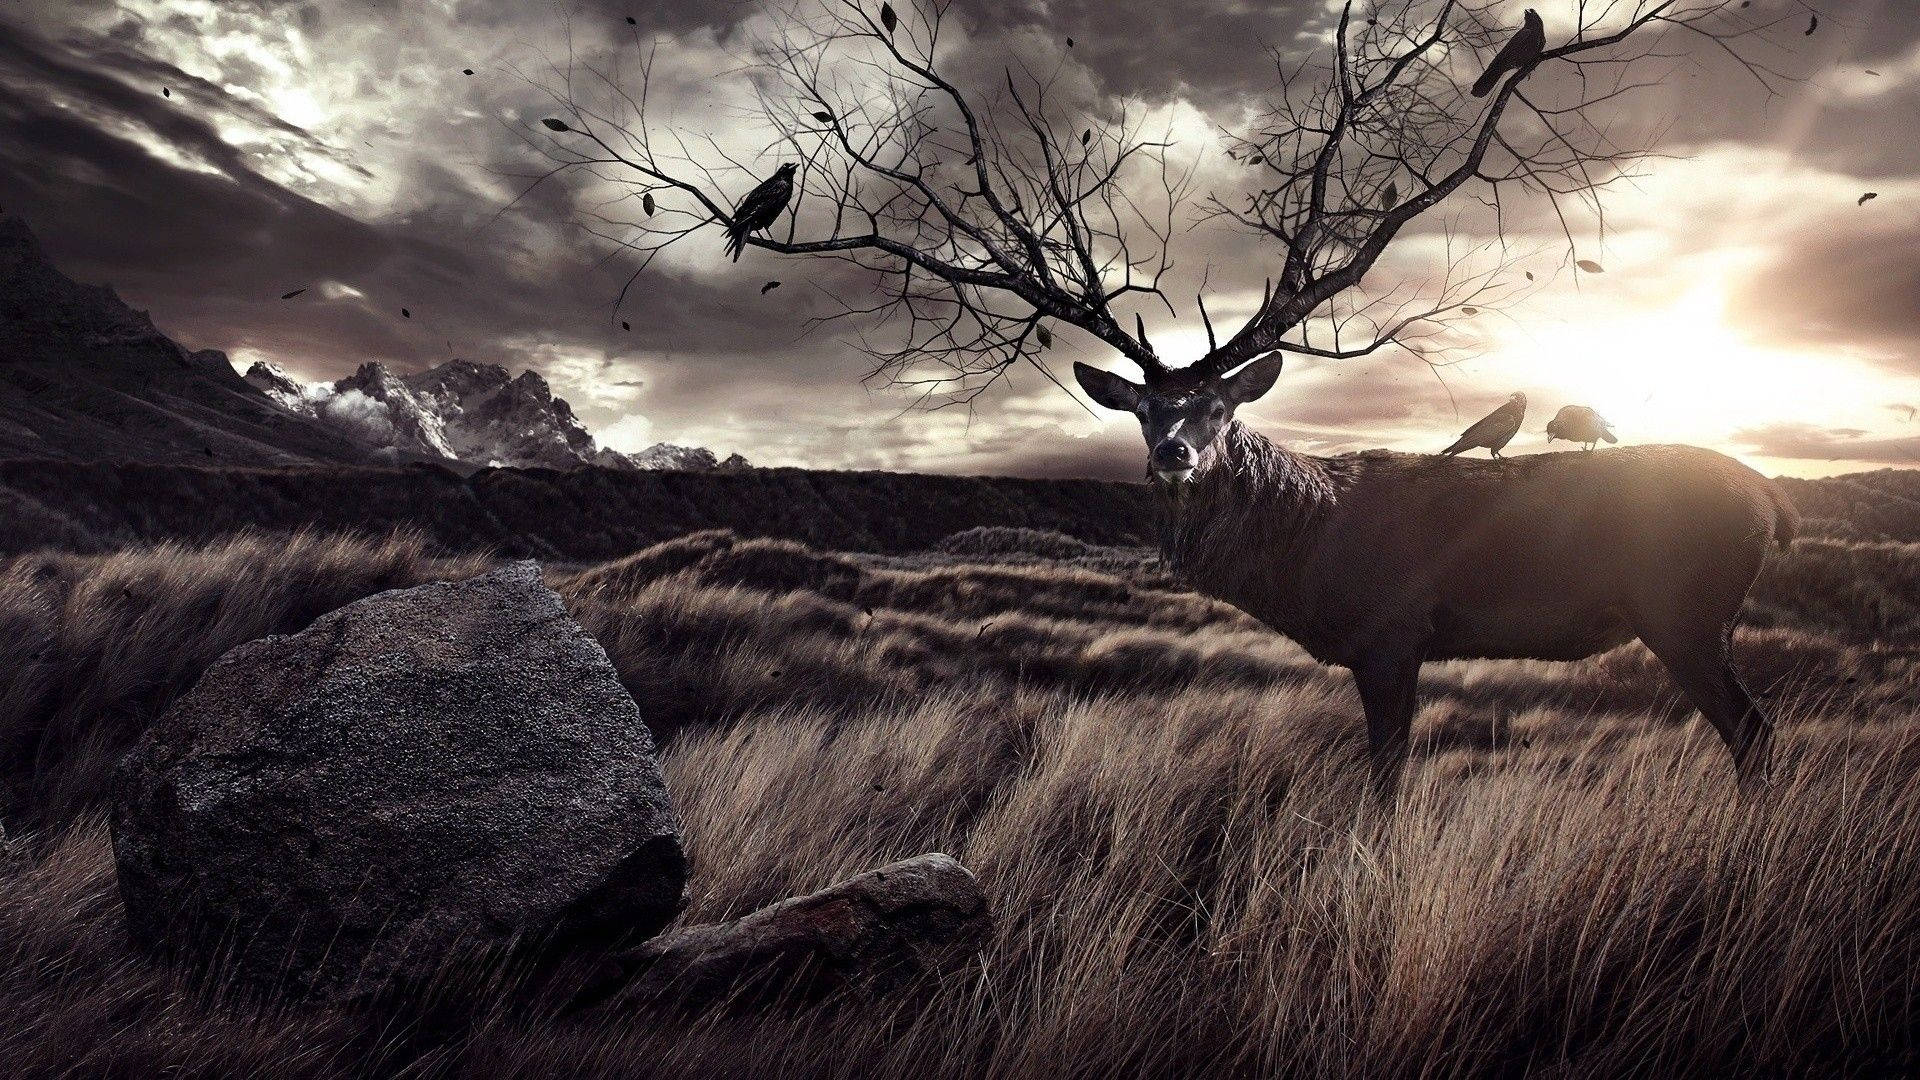 A majestic buck relaxing in a forest at dusk Wallpaper